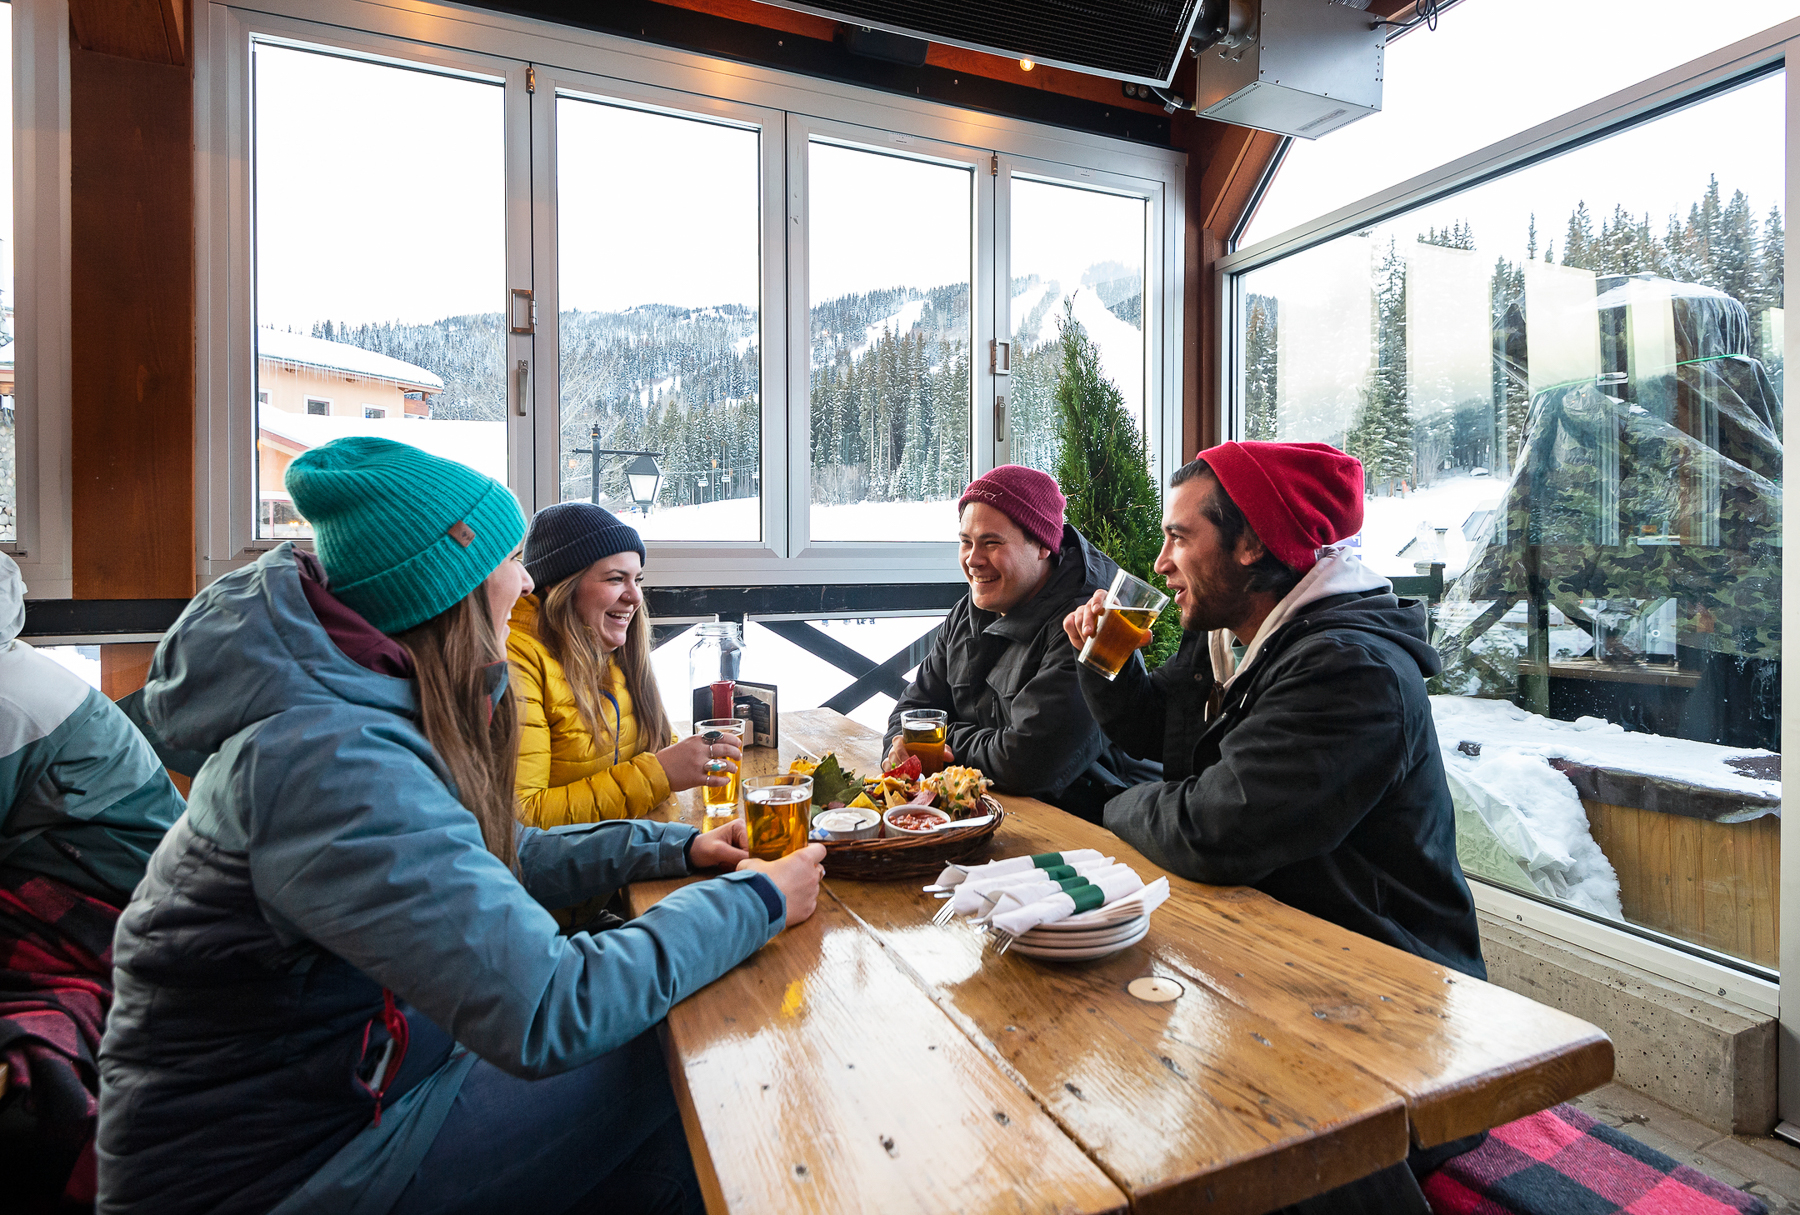 Four people sitting around a table in a bar with mountain views in the background